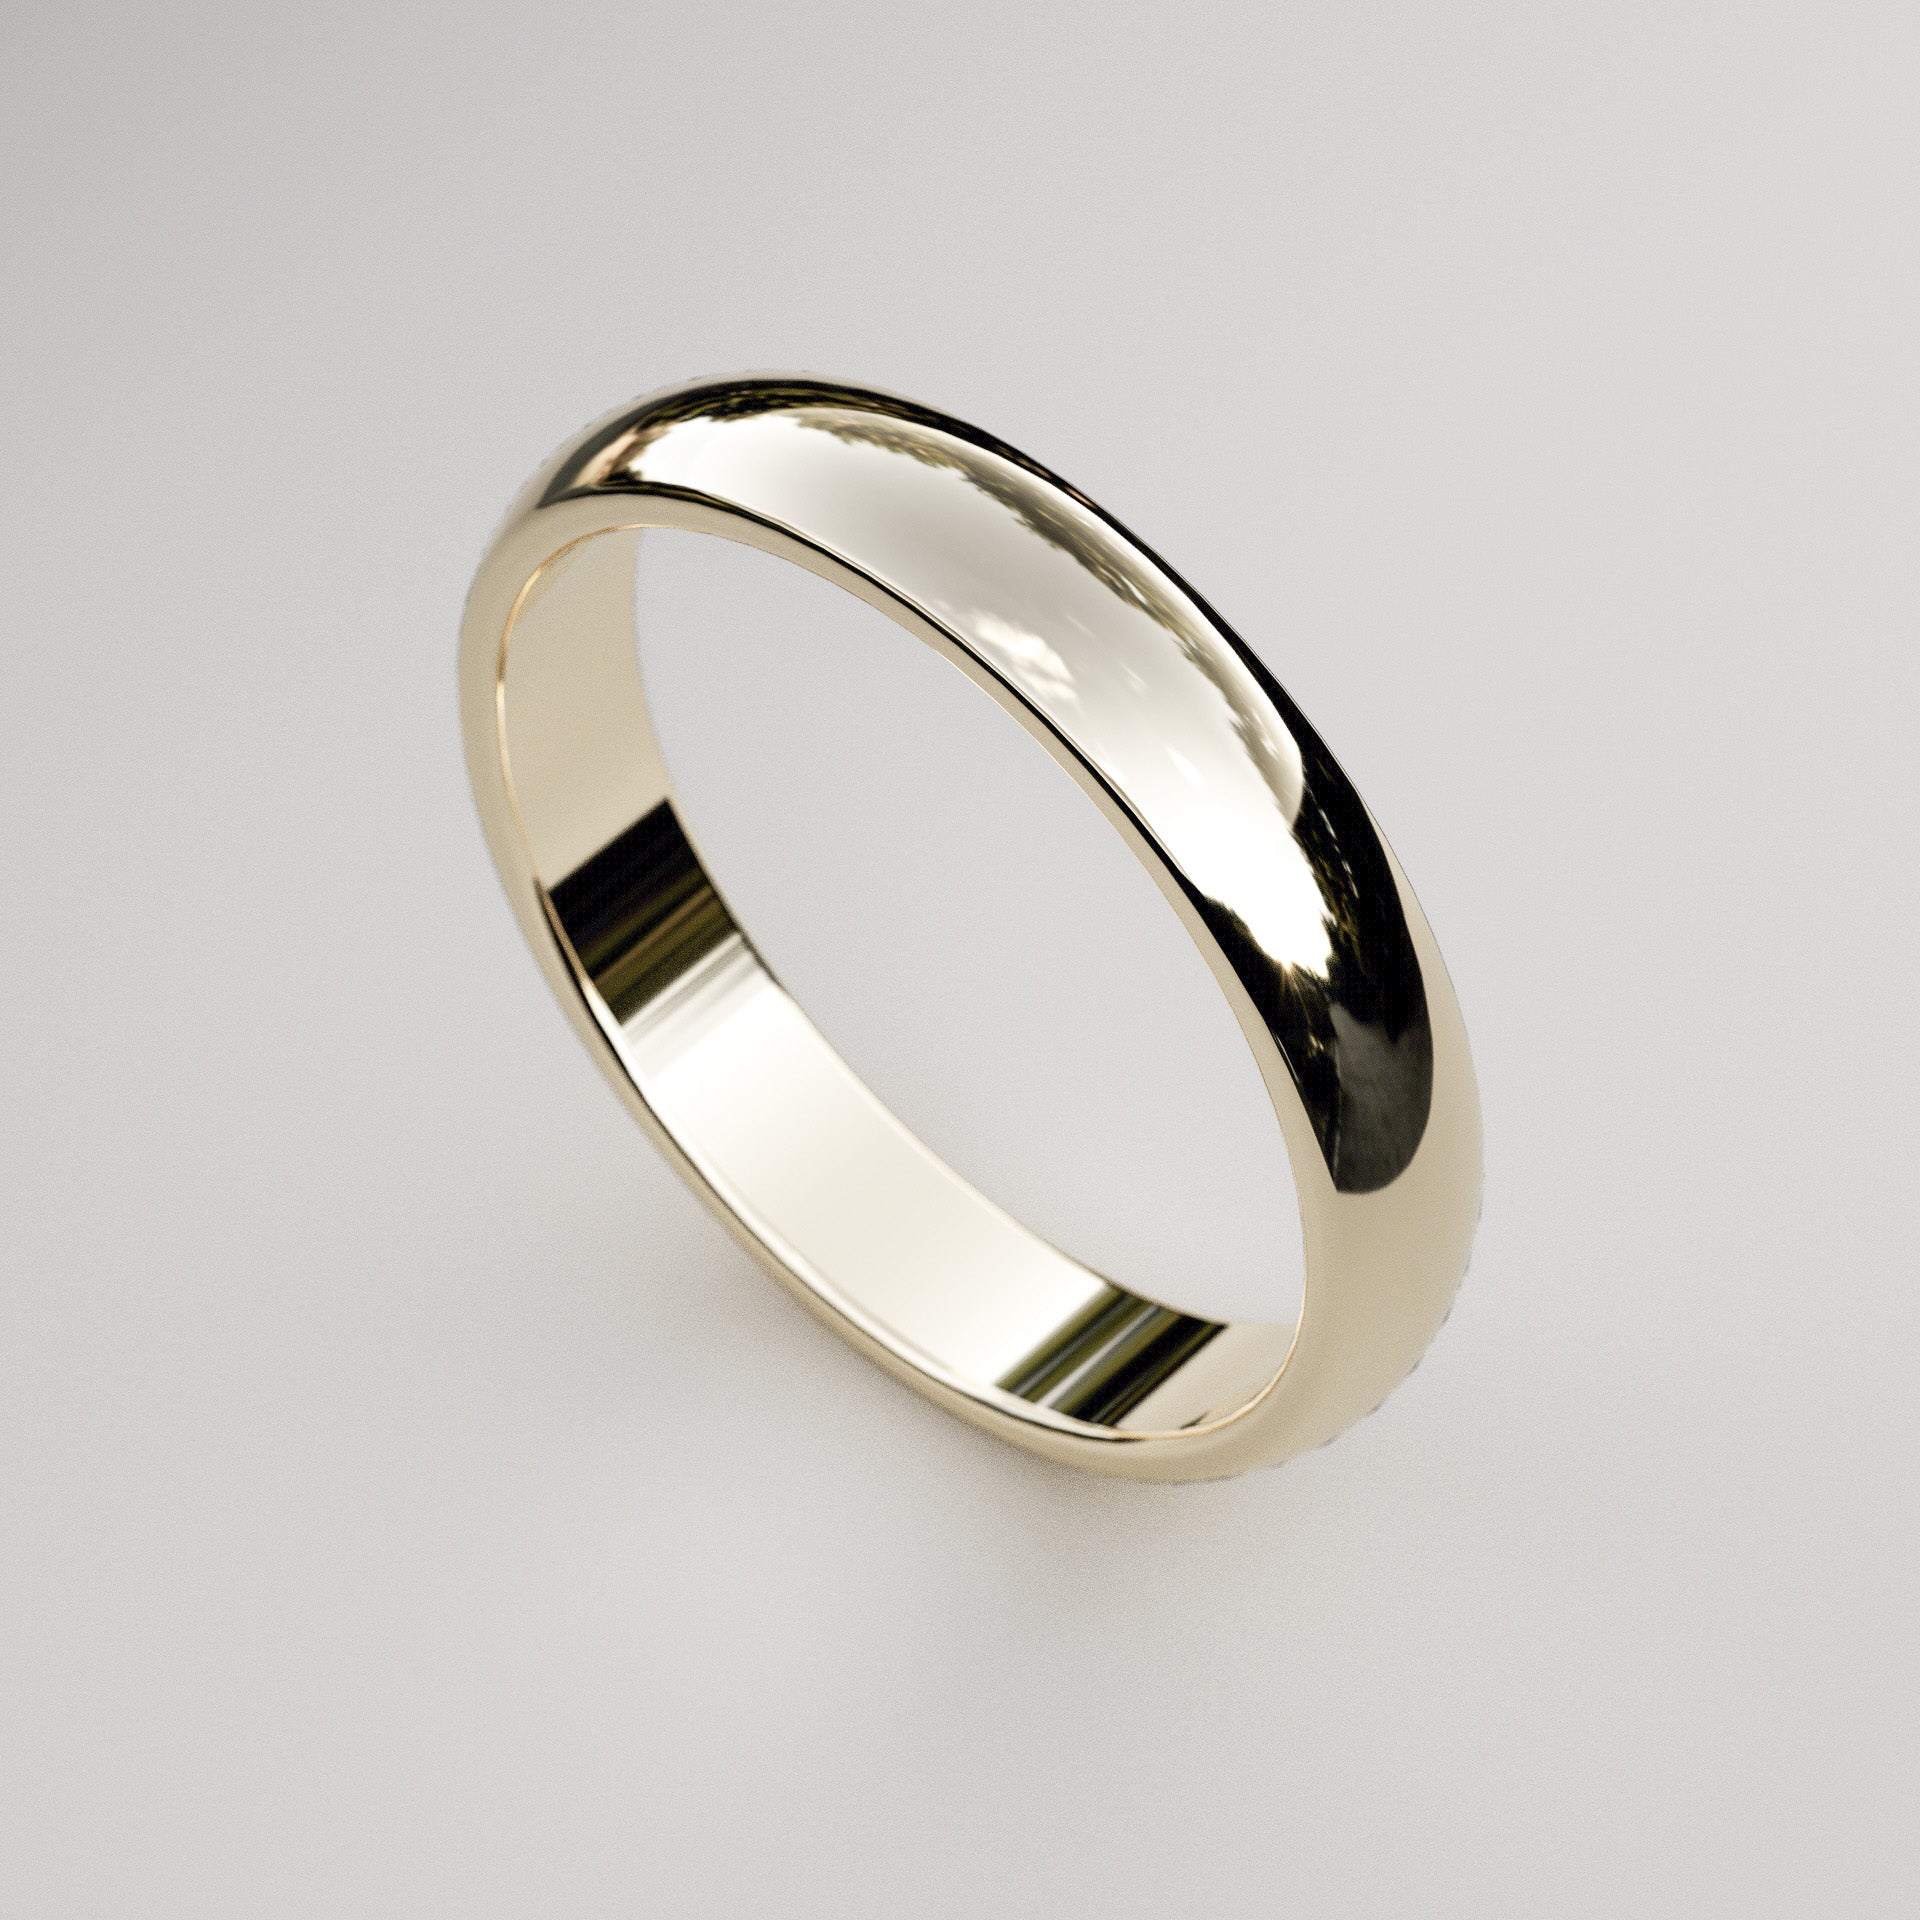 simple 4mm wide wedding band in yellow gold